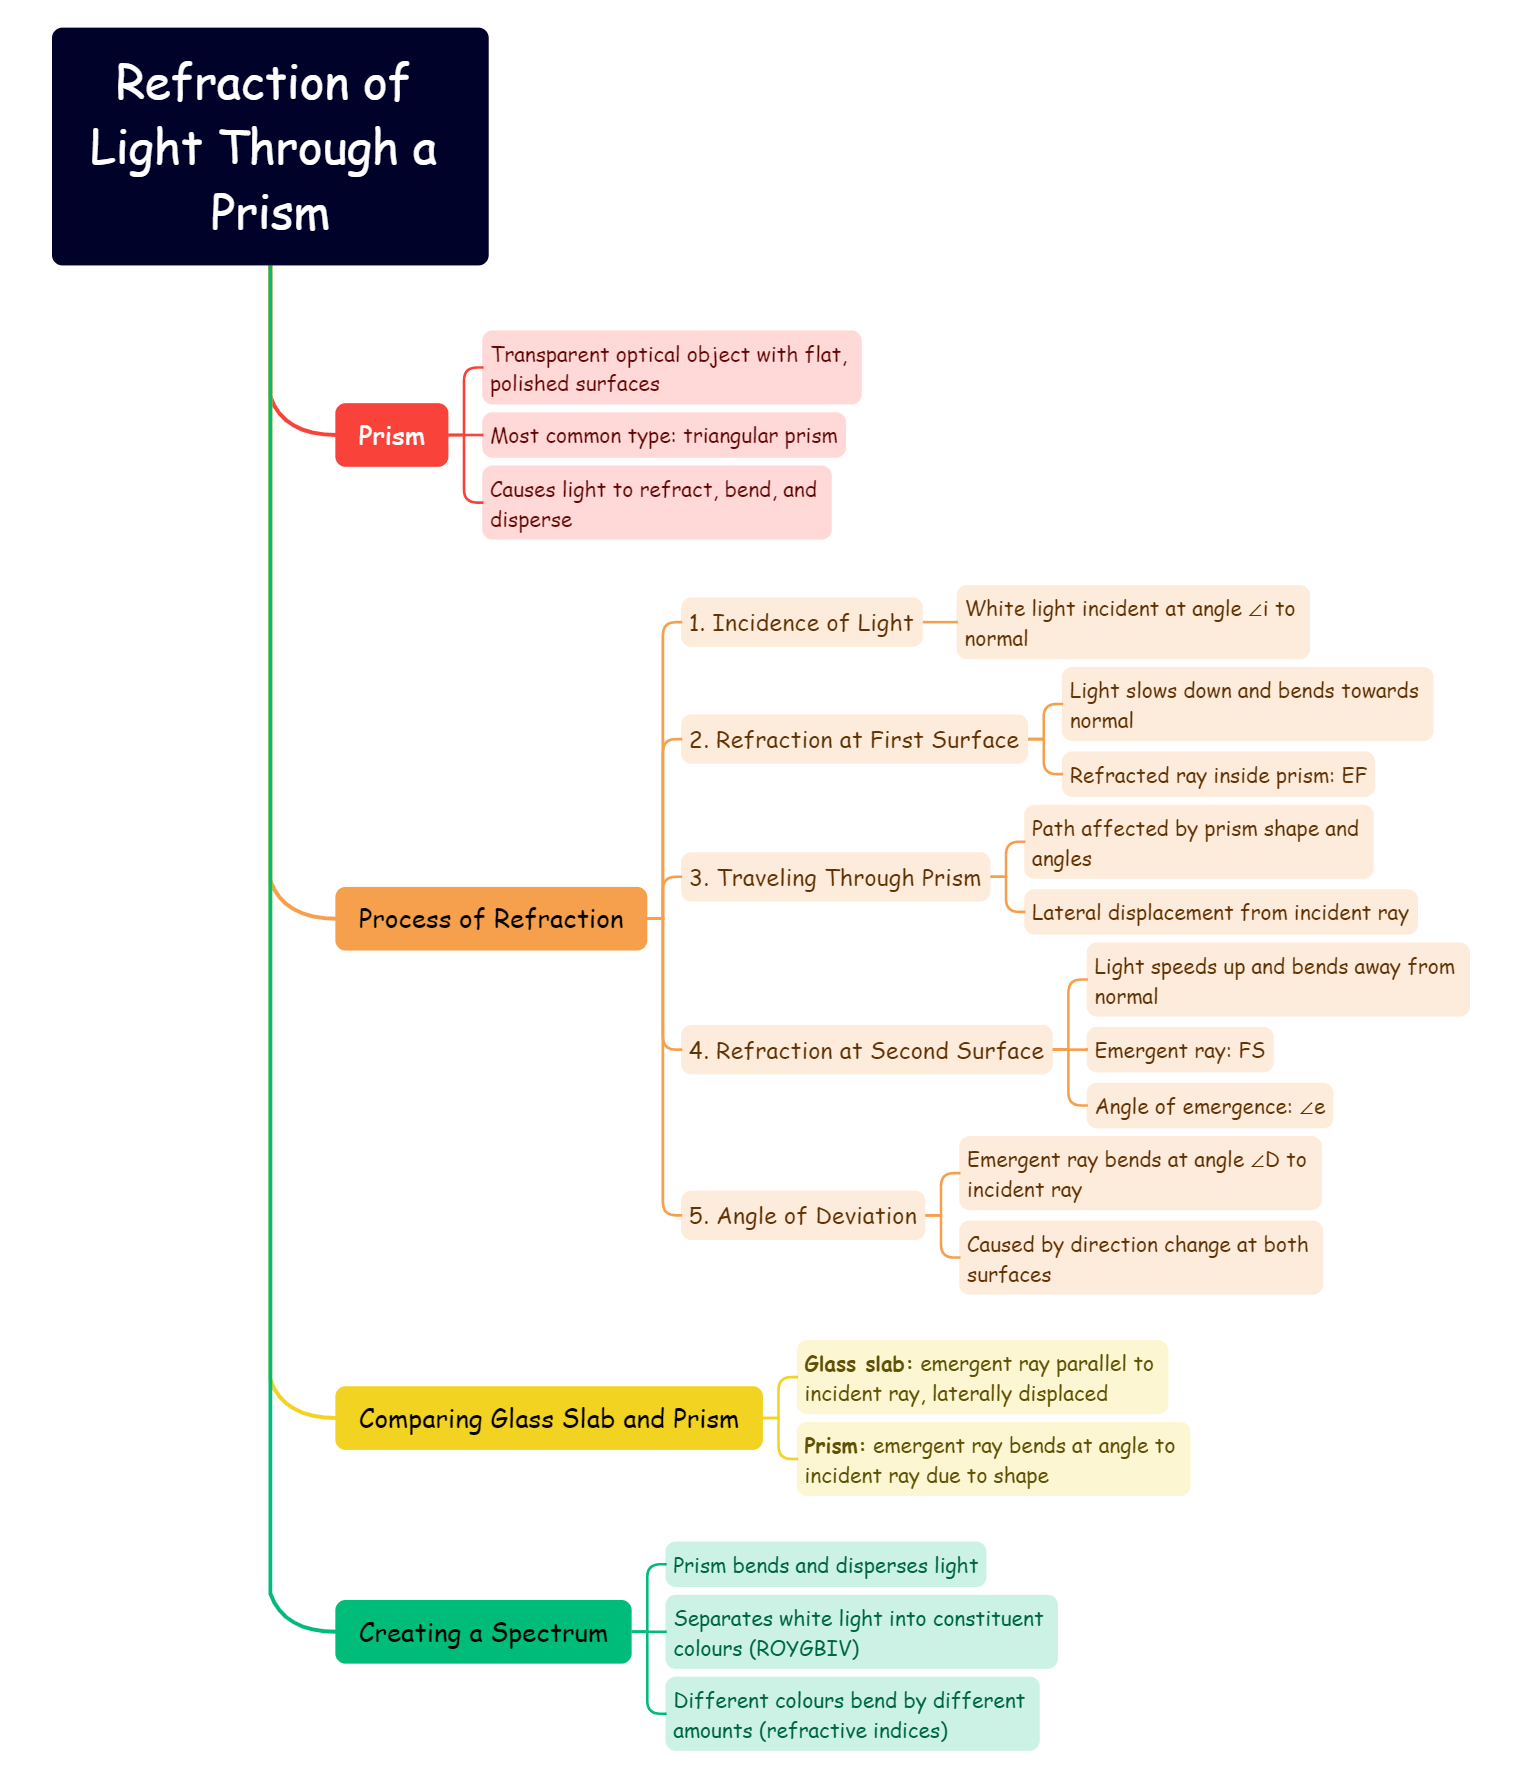 Refraction of Light Through a Prism mind map